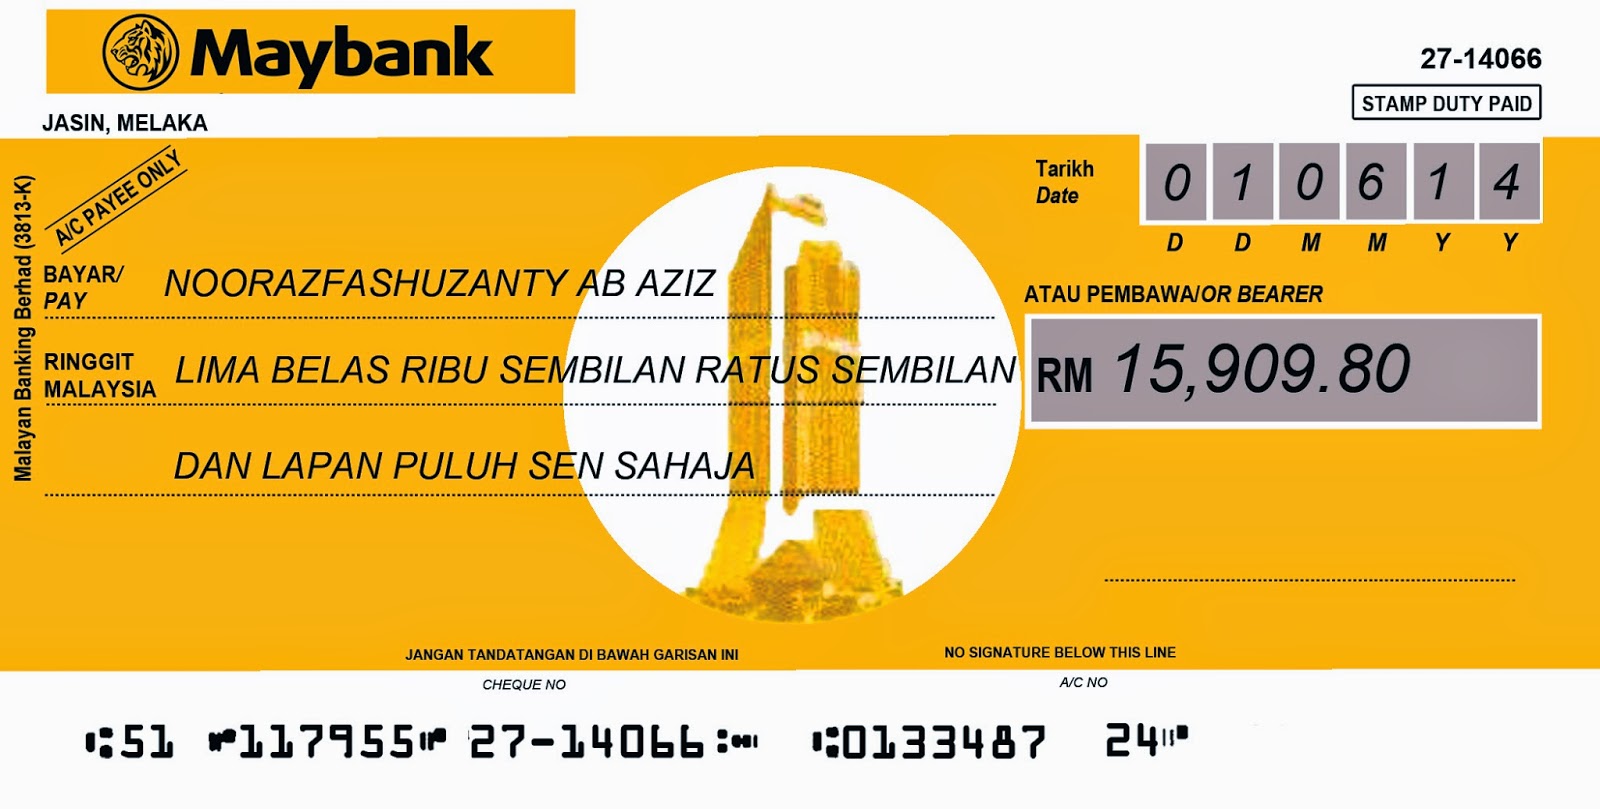 SBKM: THANK YOU TAG/TEMPAHAN MOCK UP CHEQUE